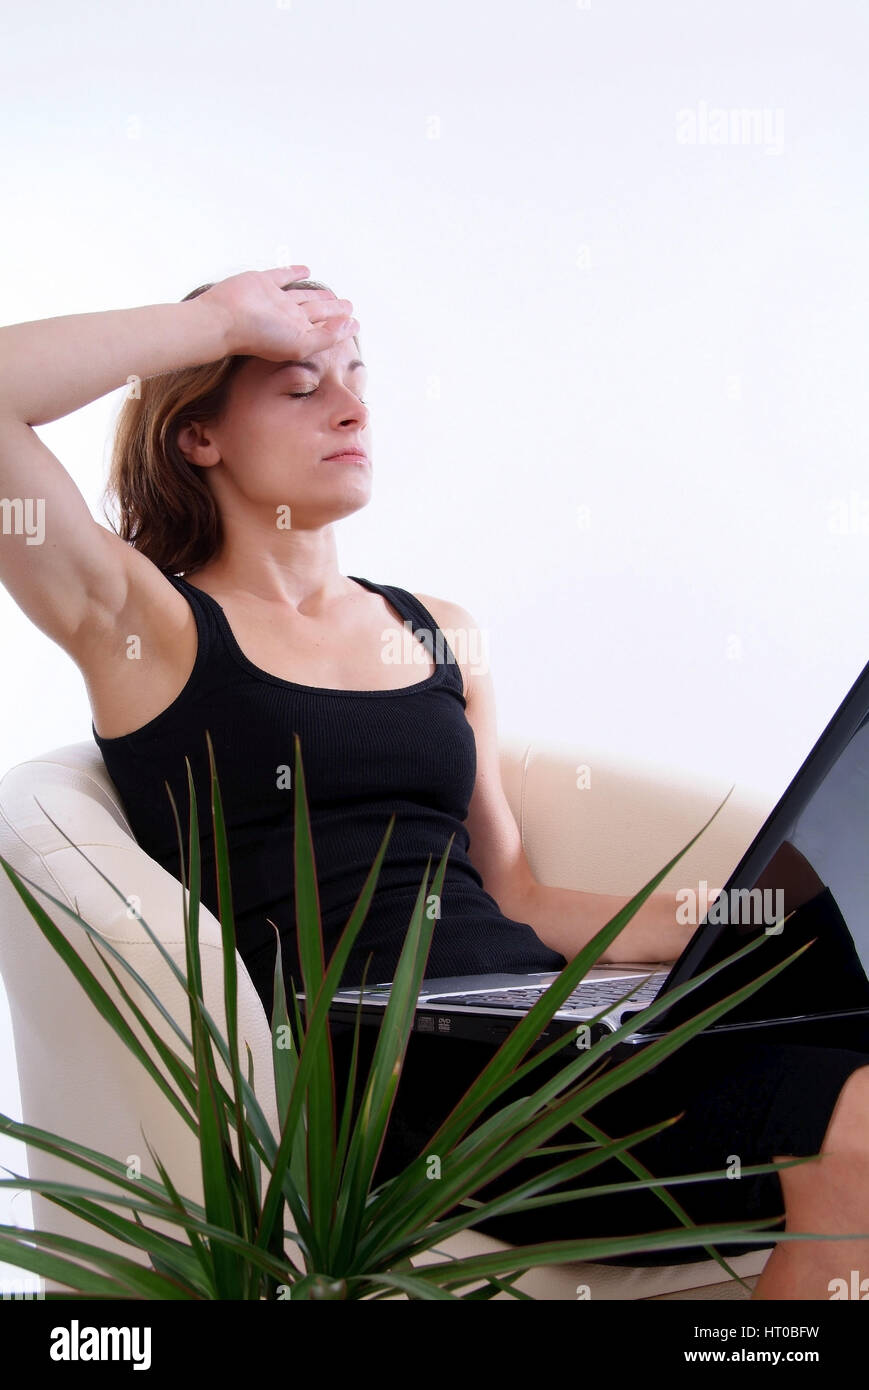 Junge, ueberarbeitete Frau mit Laptop am Scho? - young, stressed woman using laptop Stock Photo